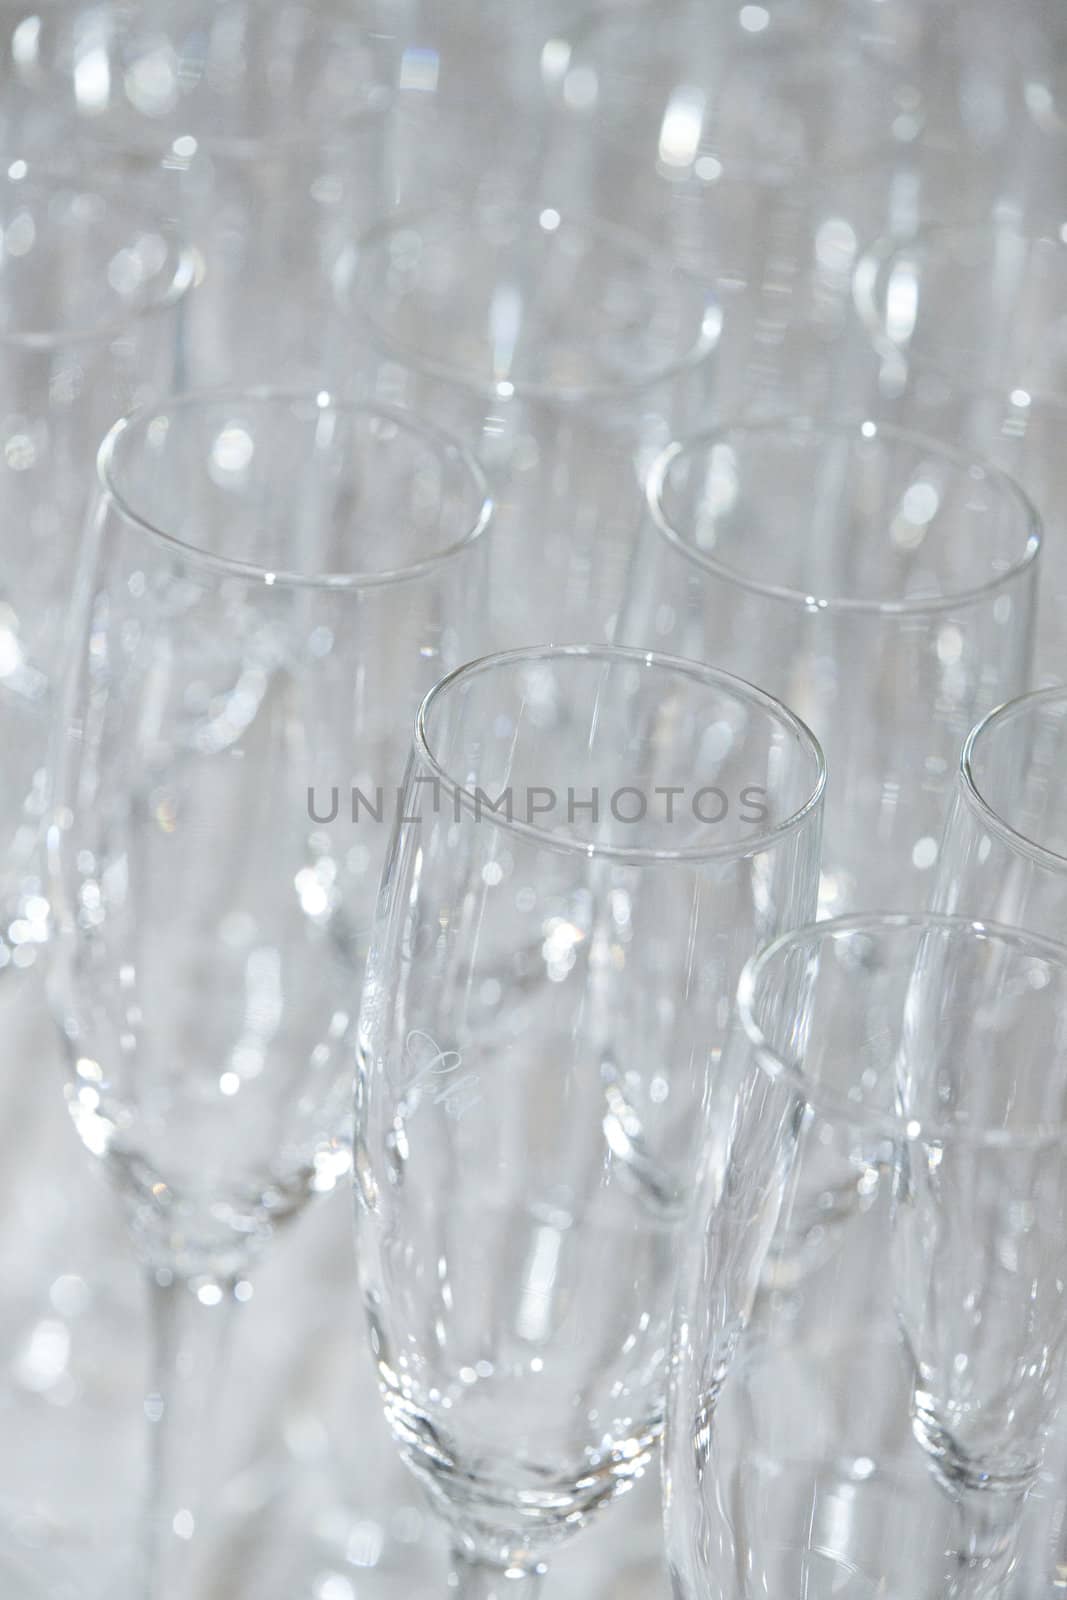 wineglasses by phbcz